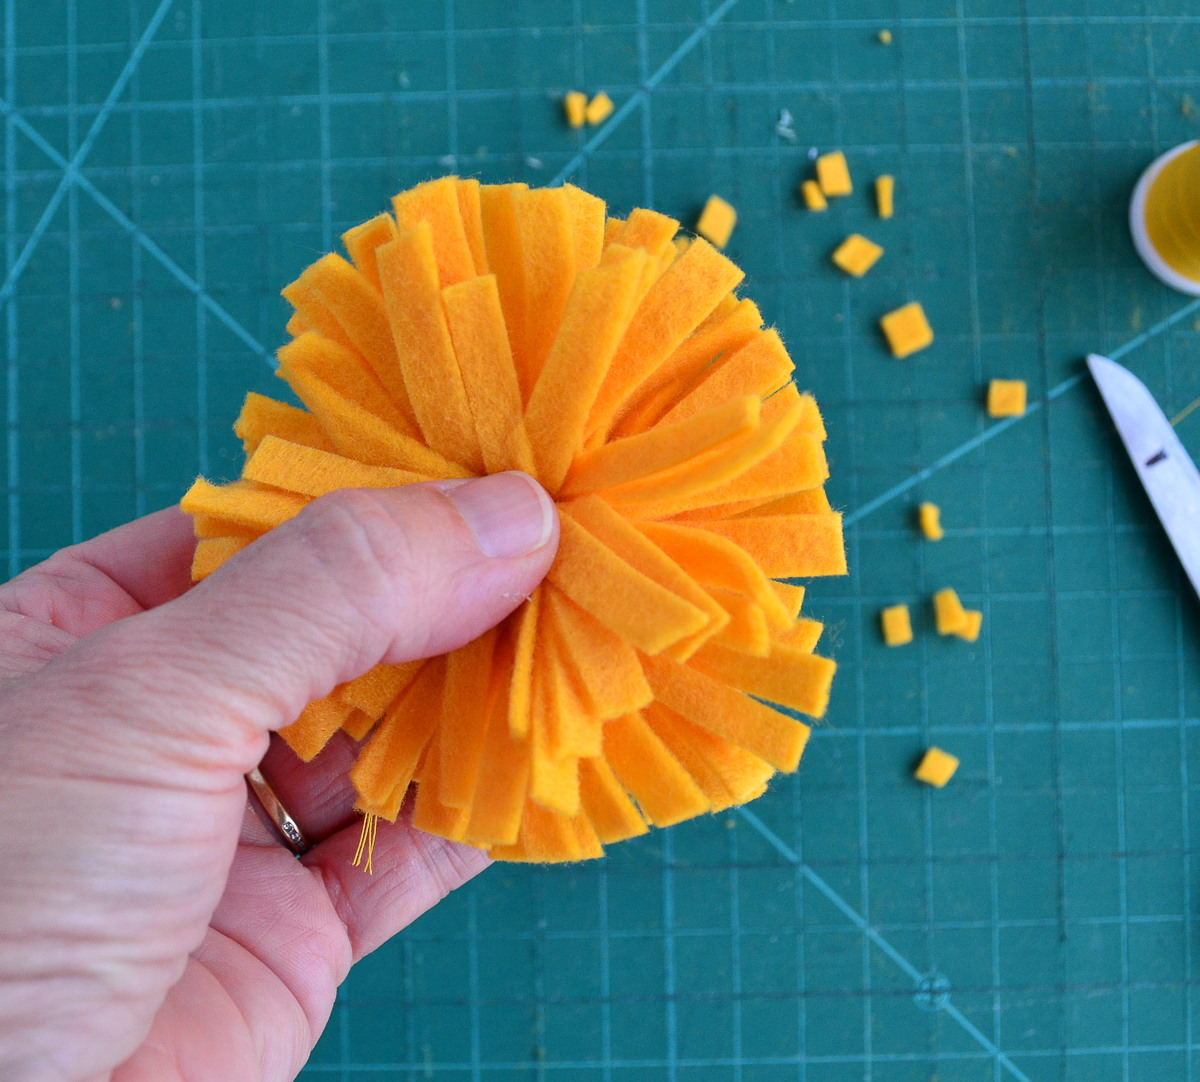 How to felt pom-poms and what to use them for by ARNE & CARLOS